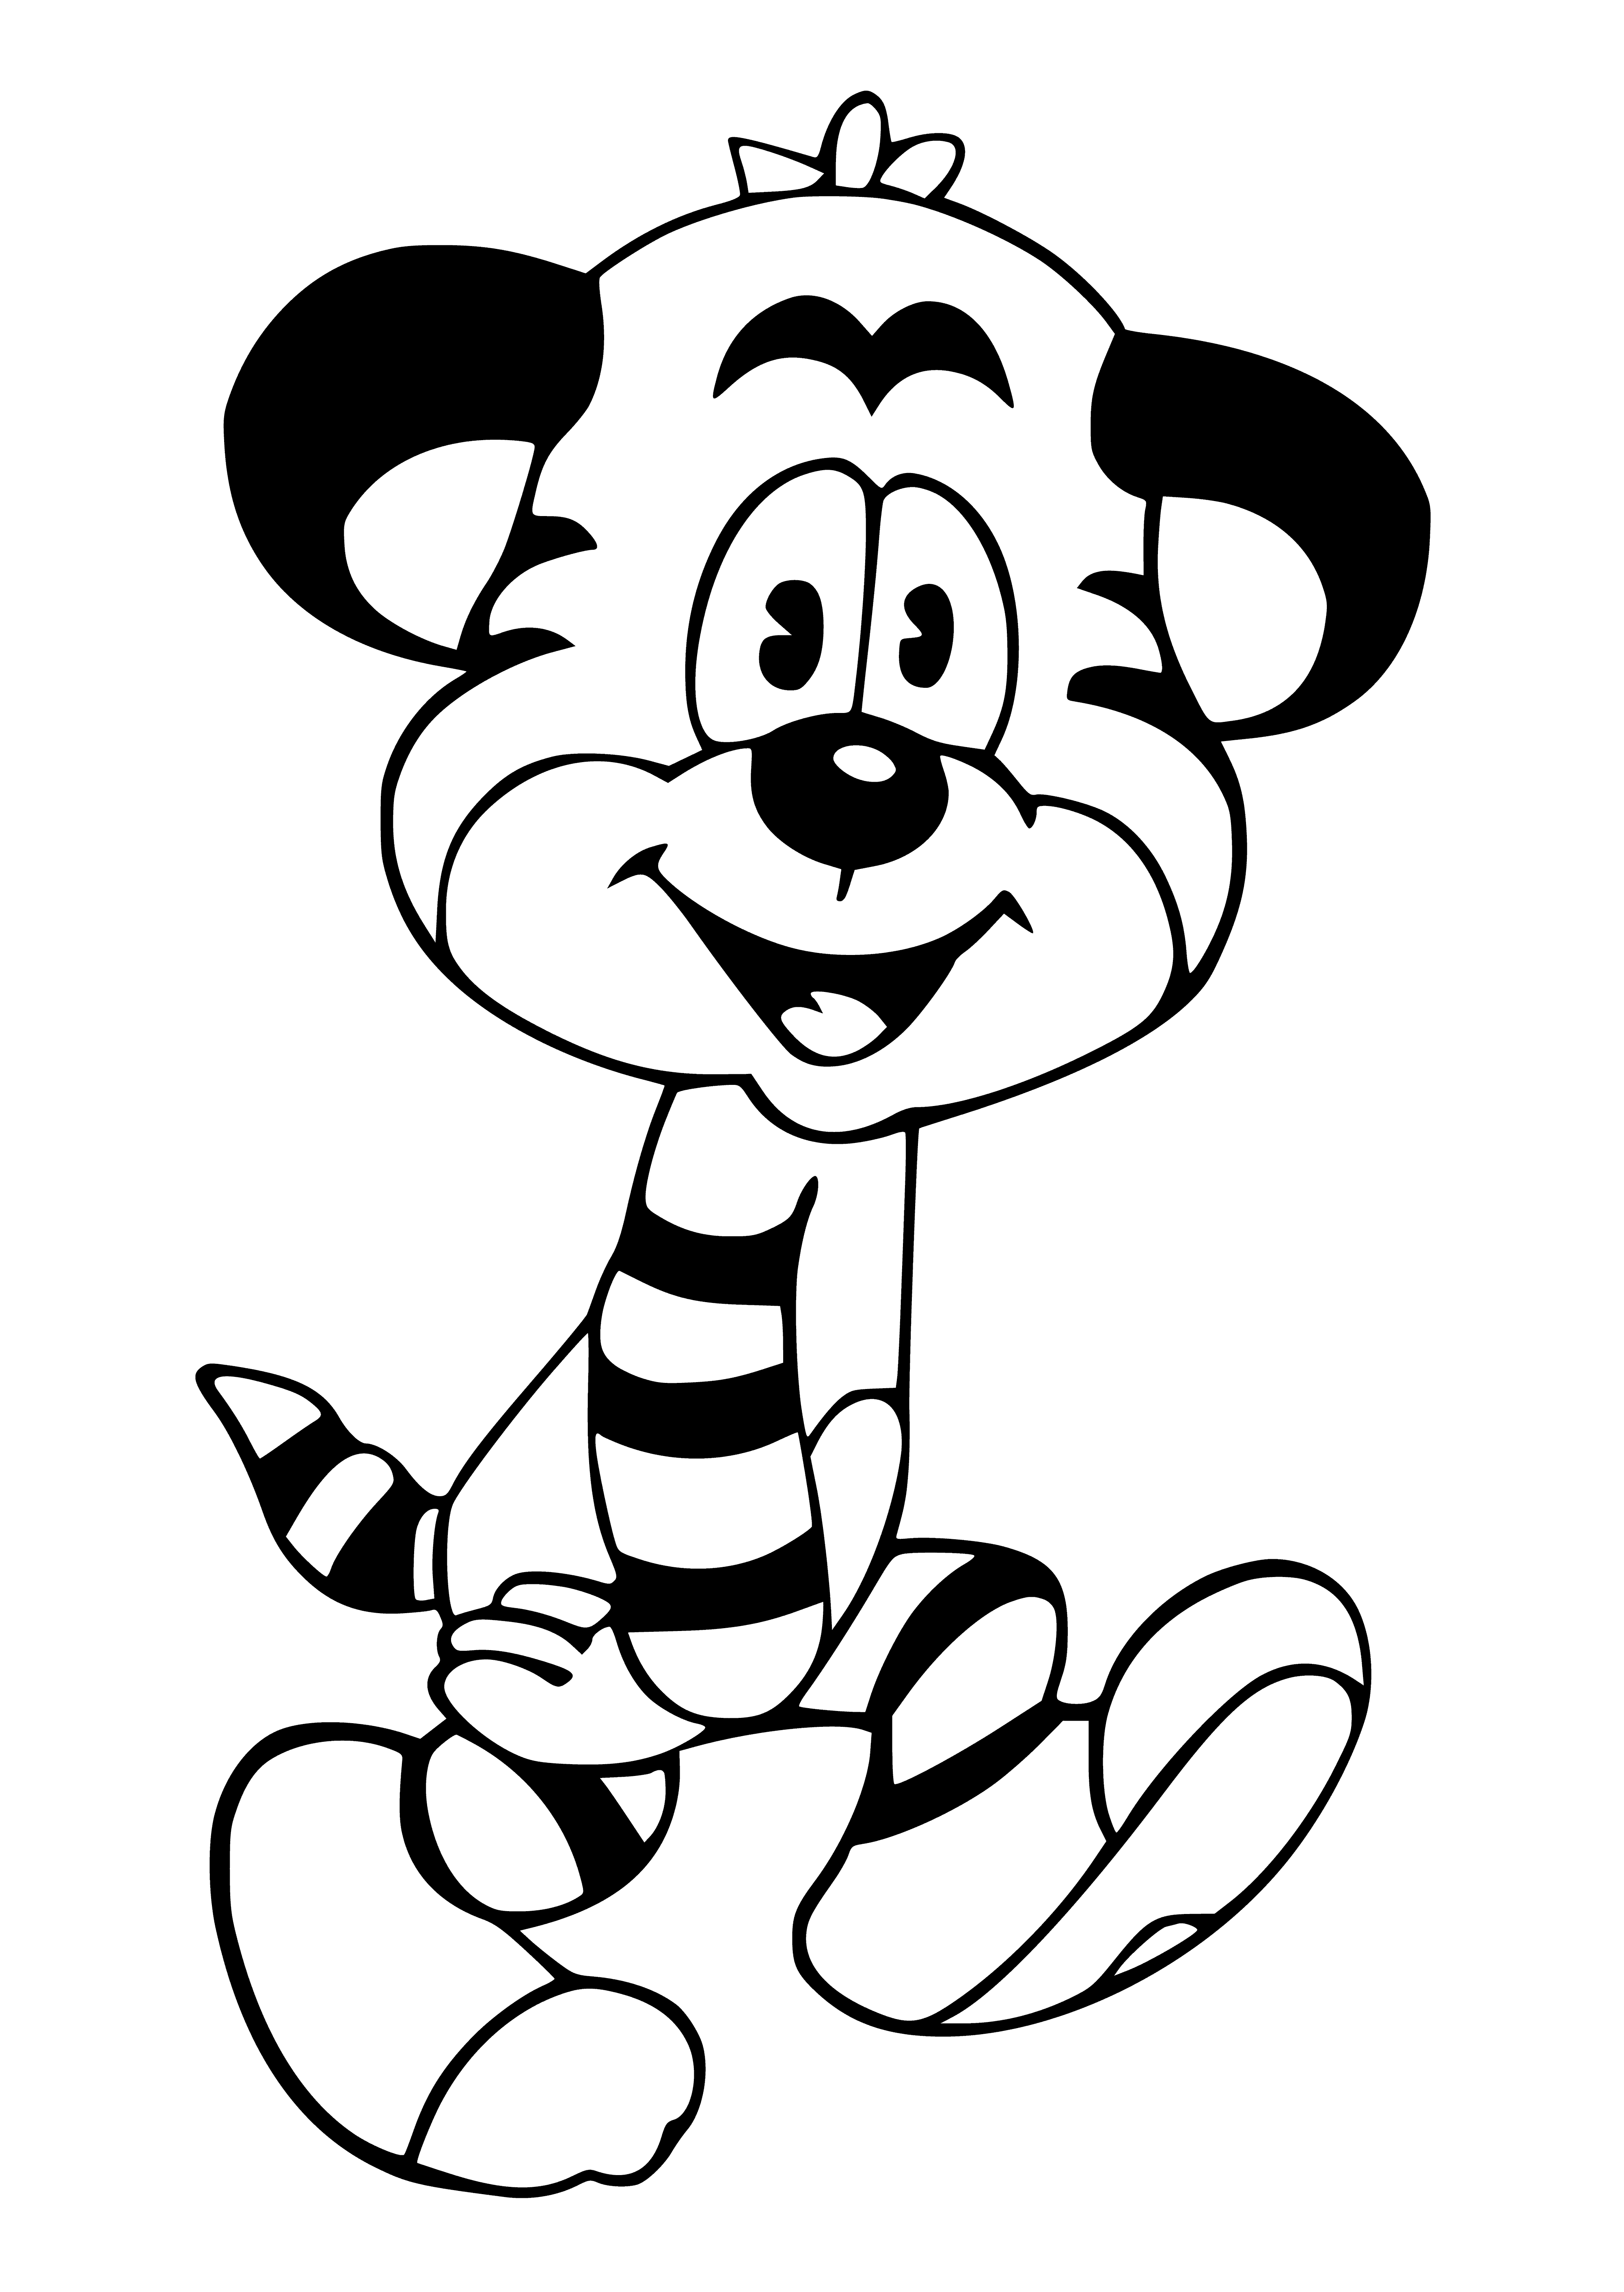 coloring page: A tiger cub relaxes in the sun, paws up in the air, on the road with clouds in the sky.